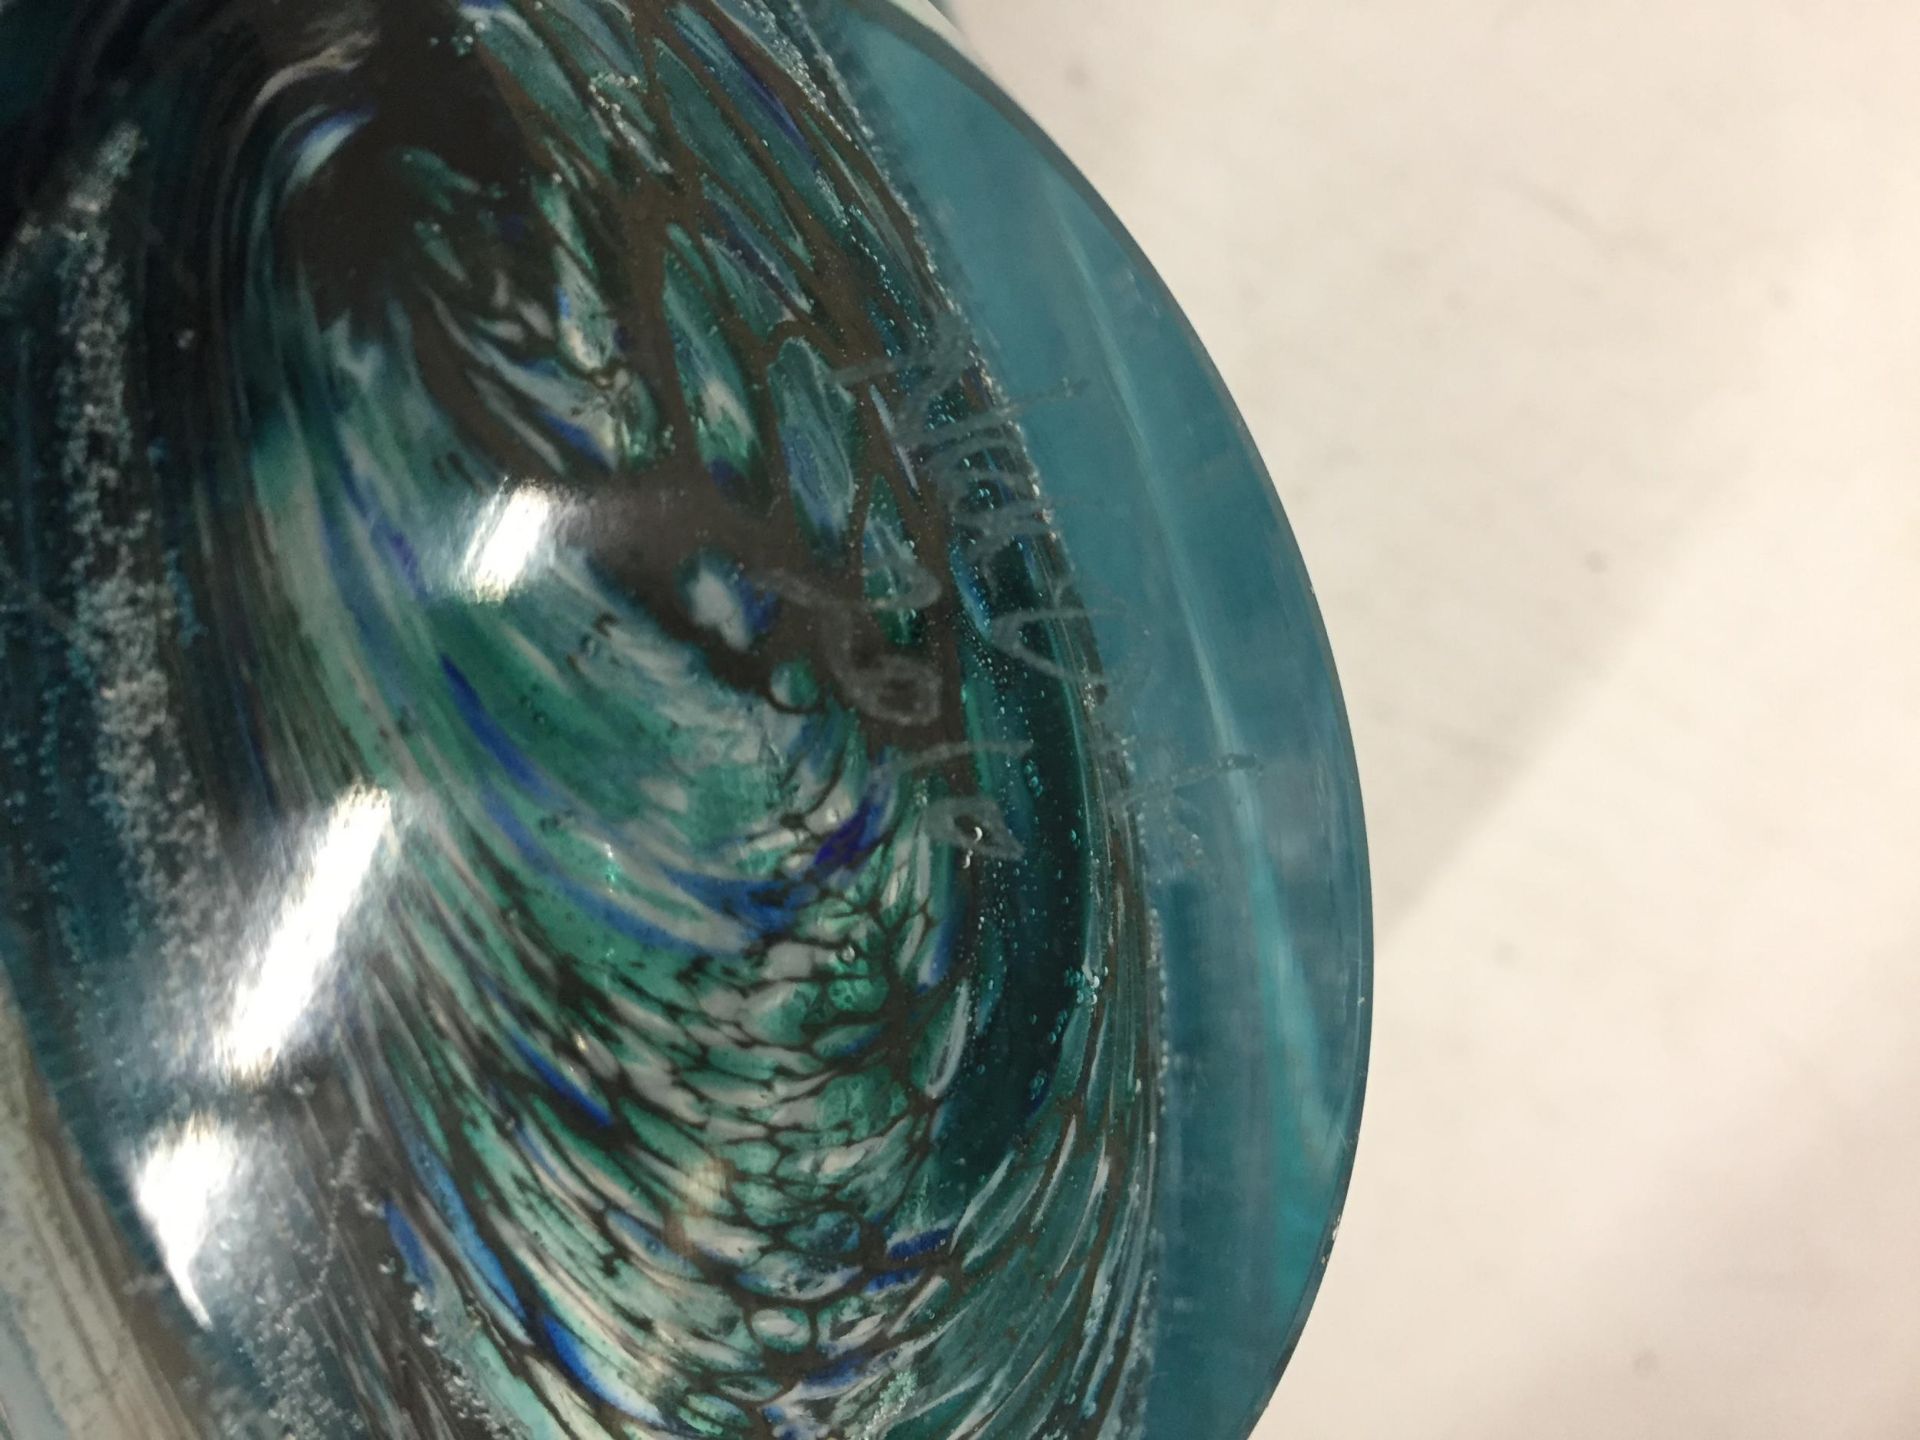 A LARGE ABSTRACT ART GLASS BOWL IN THE MURANO STLYE, INDISTINCTLY SIGNED, DATED 2010 - Image 3 of 4